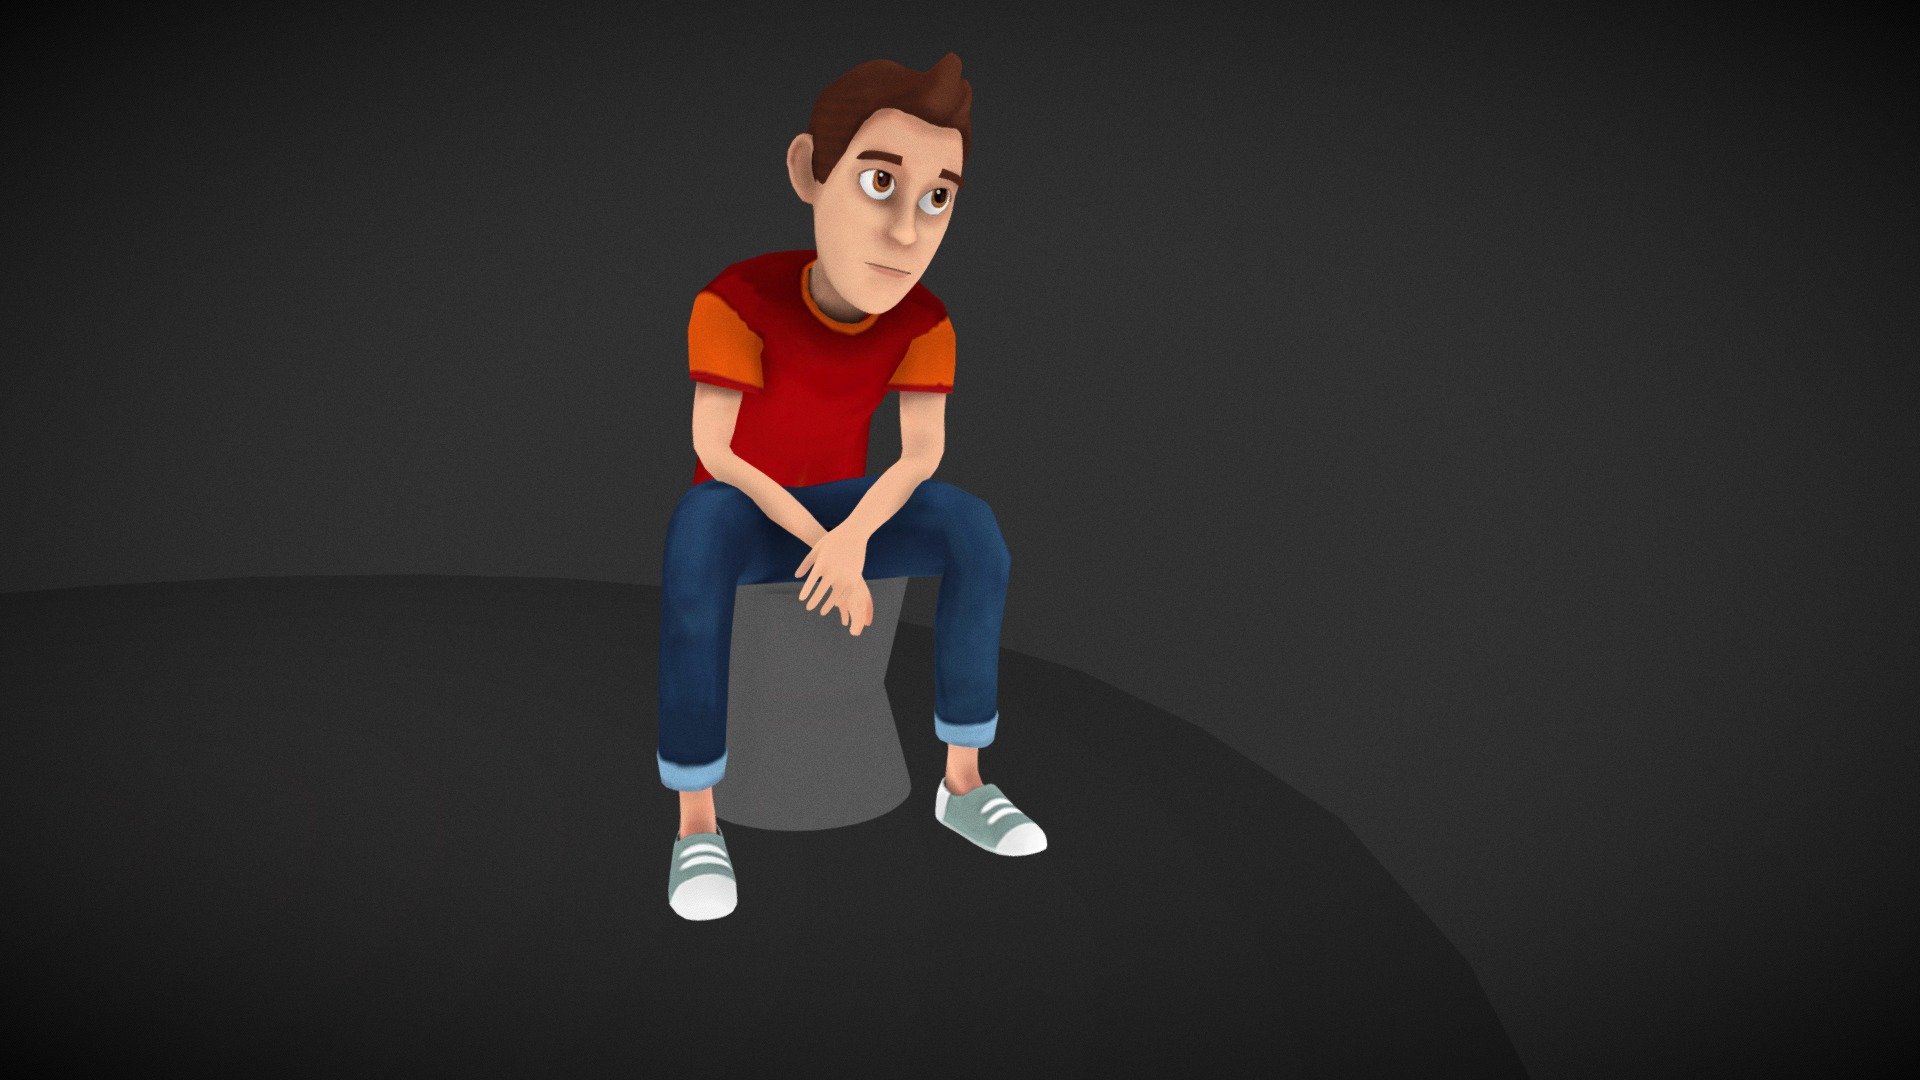 Art test for a mobile gaming company - Casual mobile game character - 3D model by garatoonart 3d model